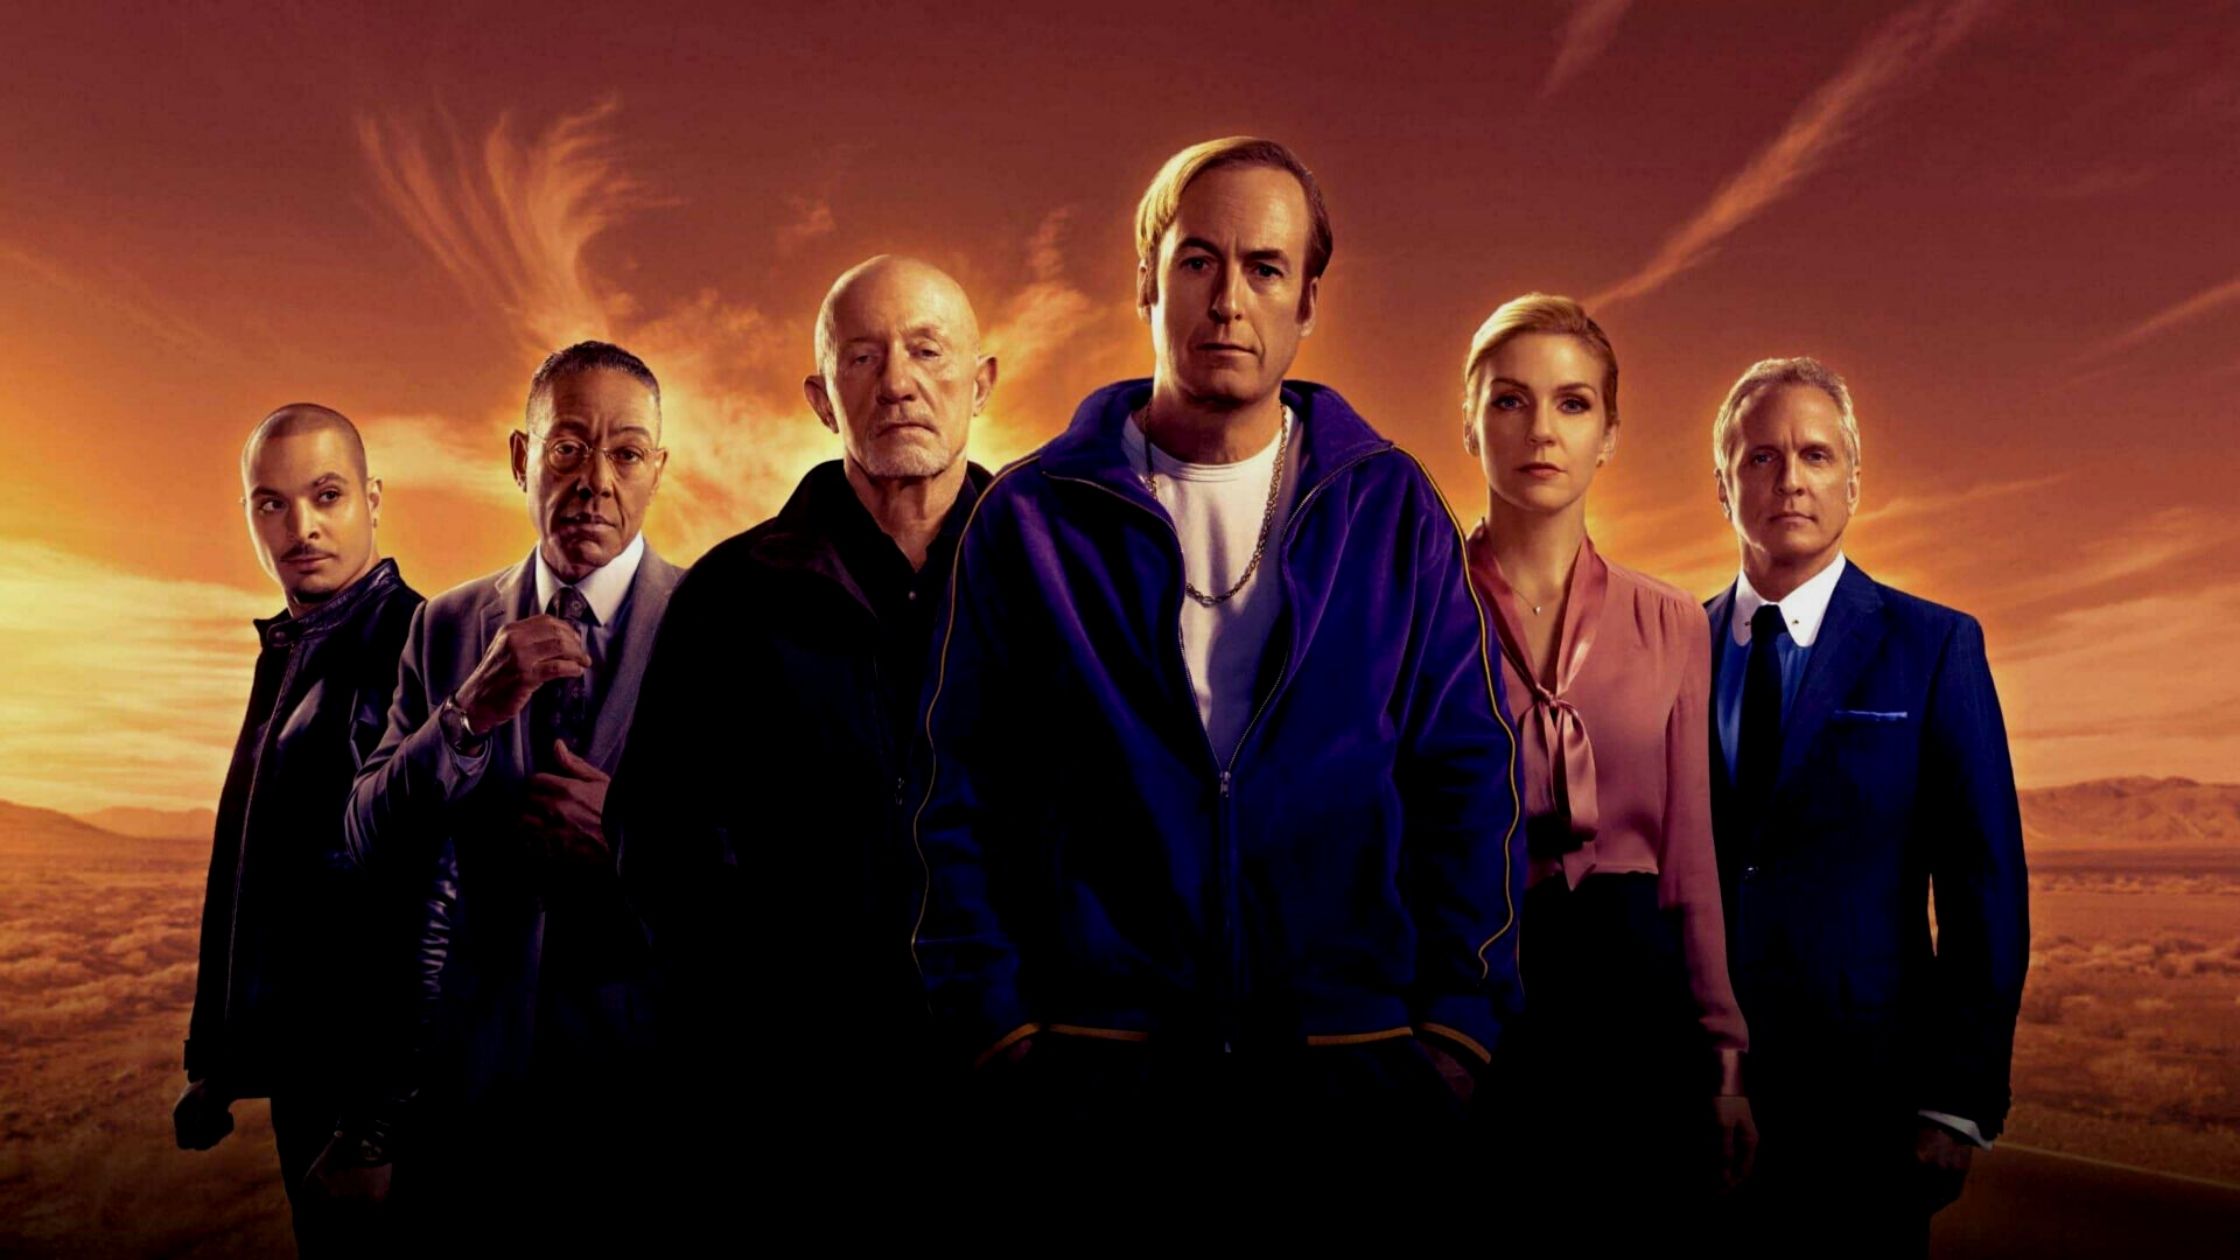 Better Call Saul Season 6 Part 2 Cast, Release Date, Where To Watch